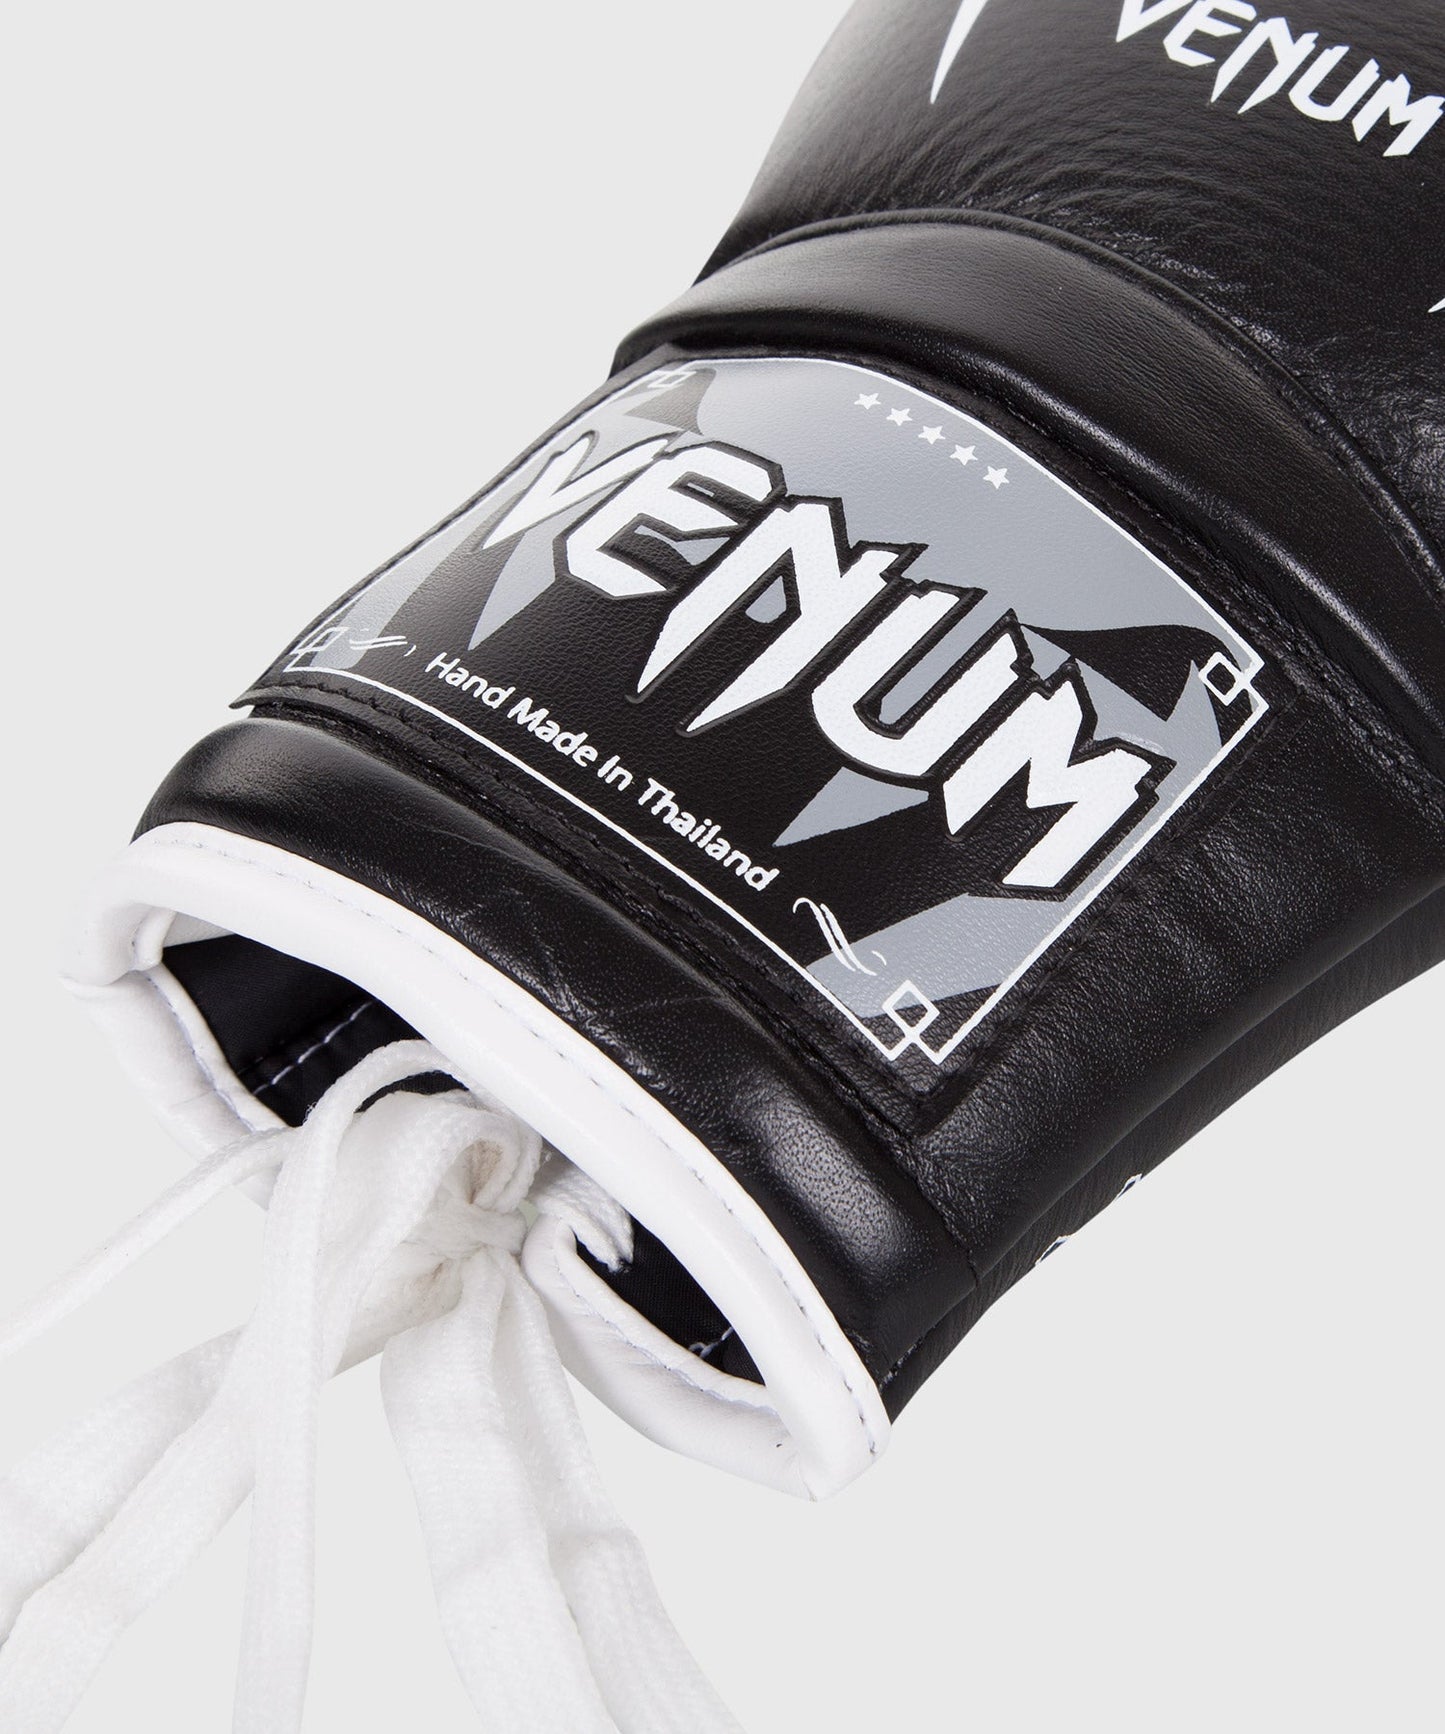 Venum Giant 3.0 Boxing Gloves - Nappa Leather - With Laces - Black